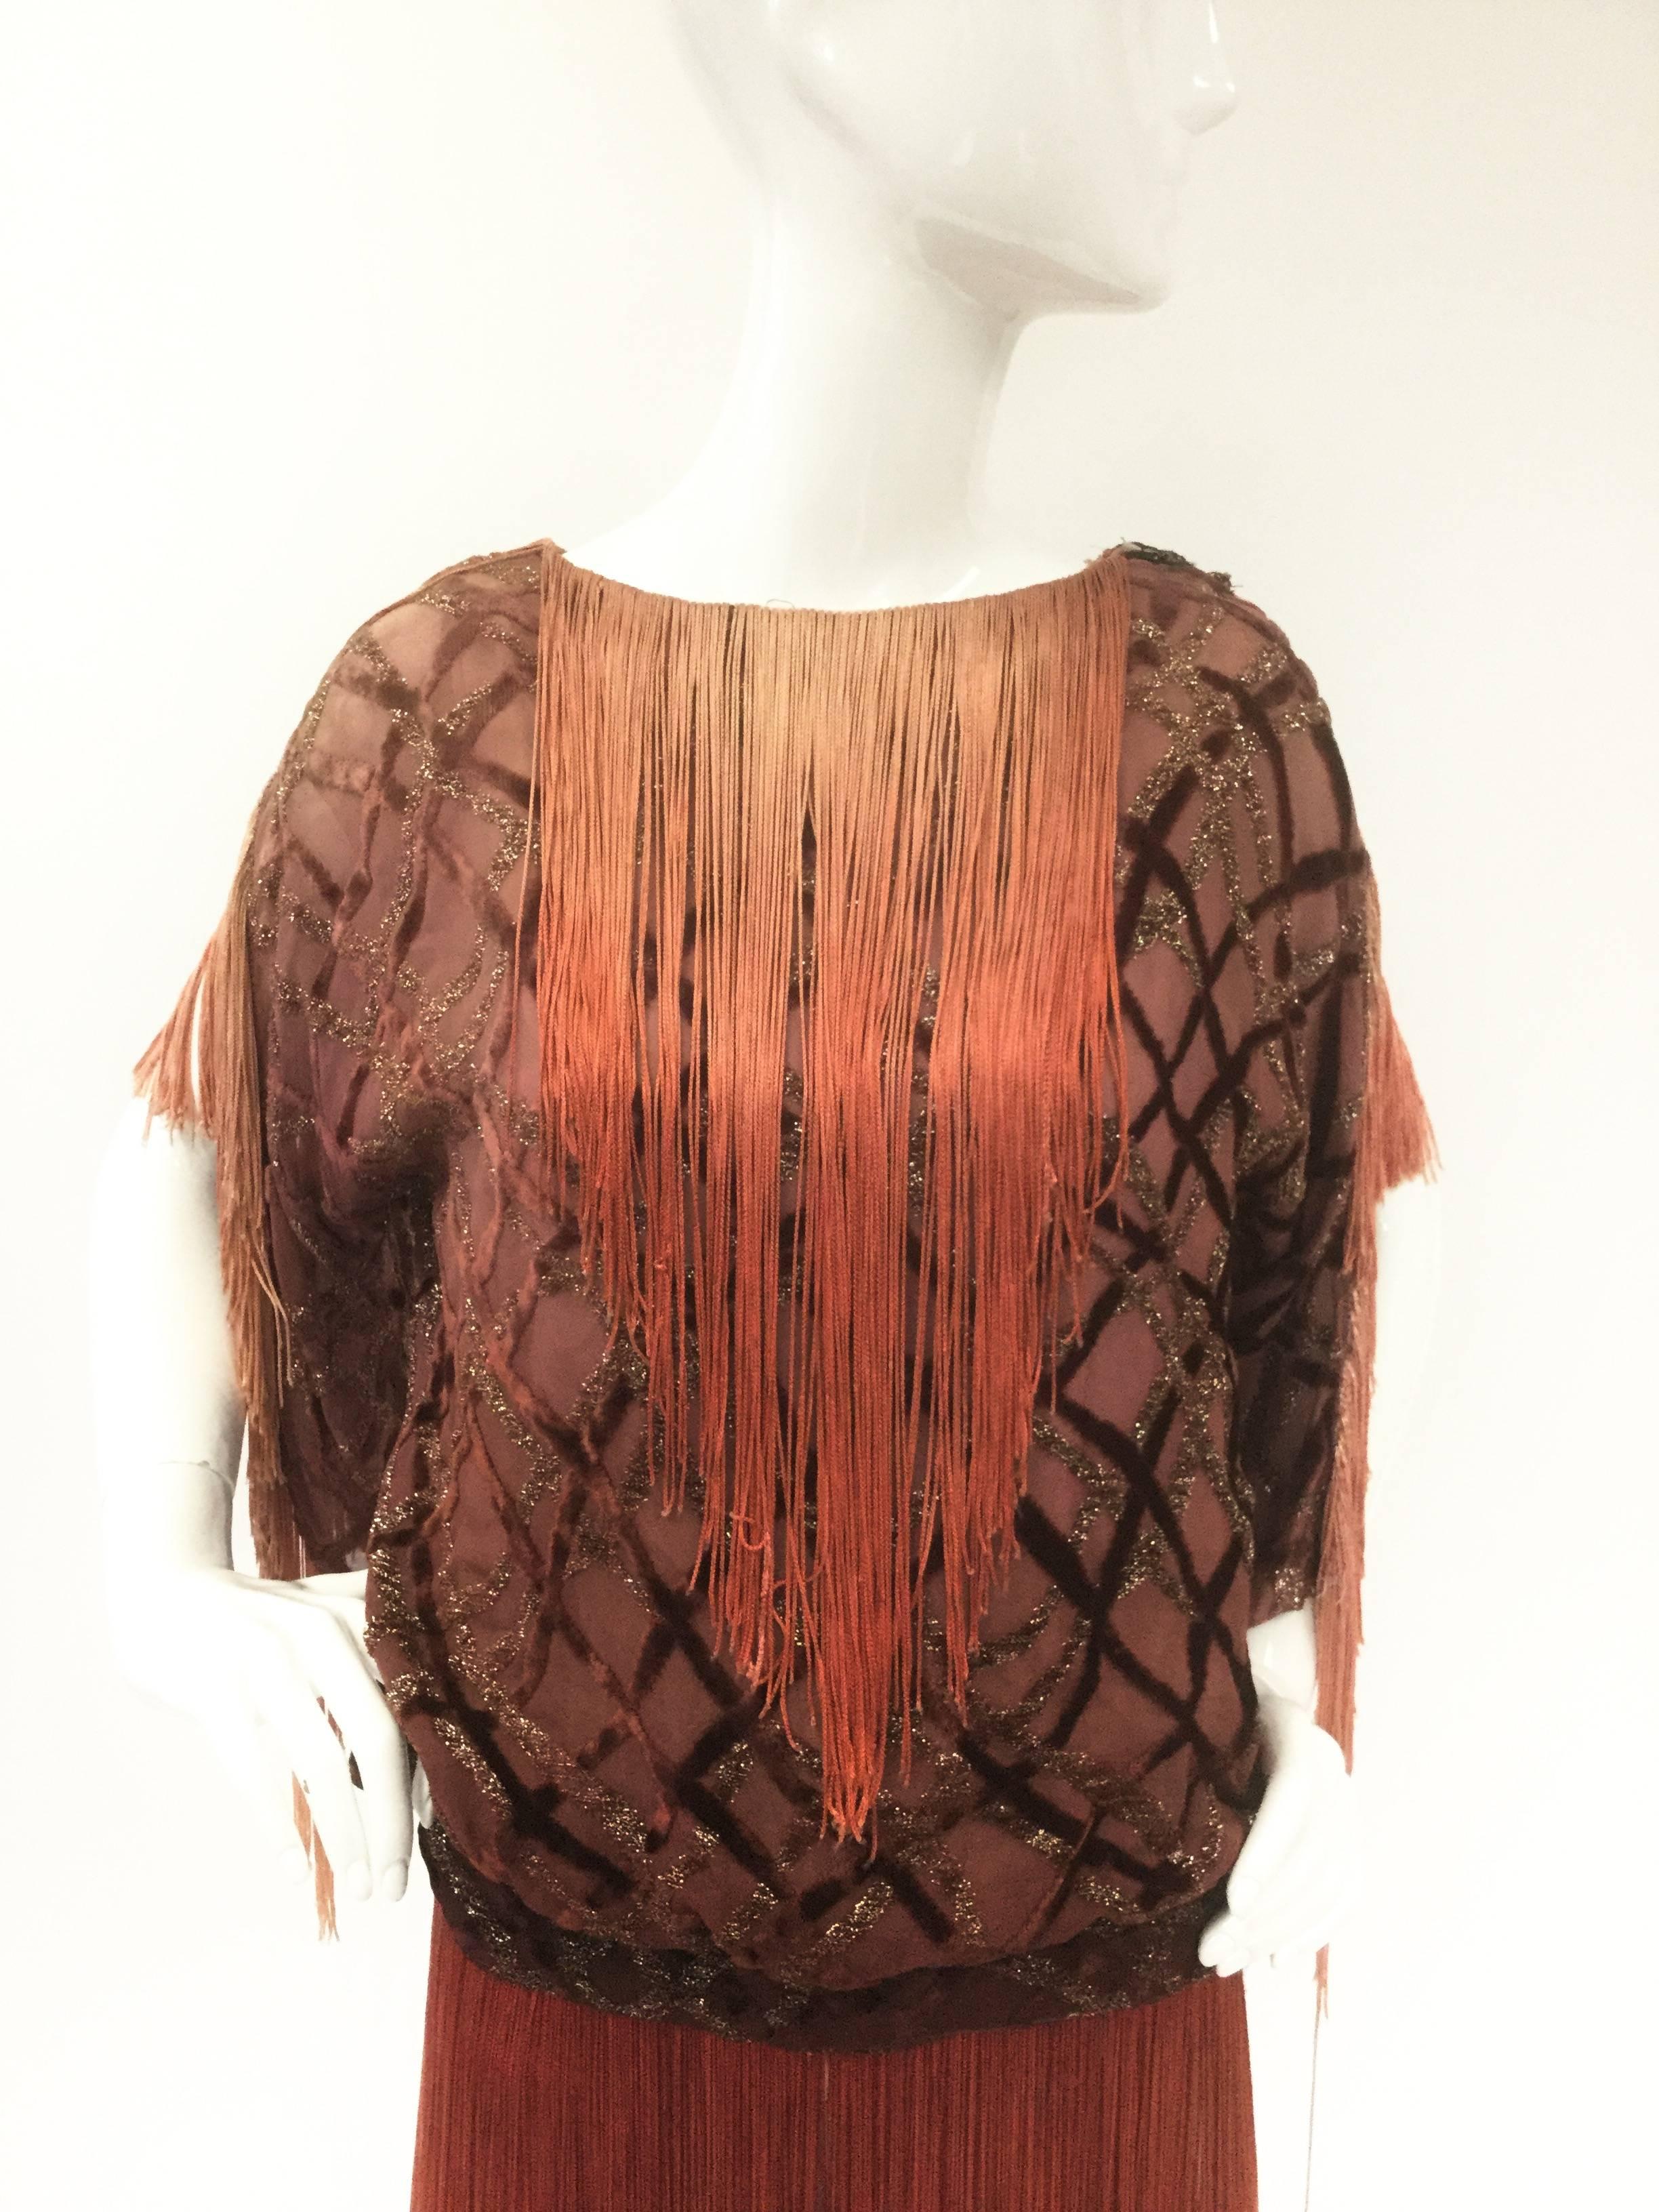 Absolutely impeccable 1920s flapper tunic! This gorgeous piece is composed of a drop waist sheer blouse with cross-crossing velvet diamond lattice overlaid with a gold thread lattice. The blouse has a built-in camisole. The bateau boat collar of the